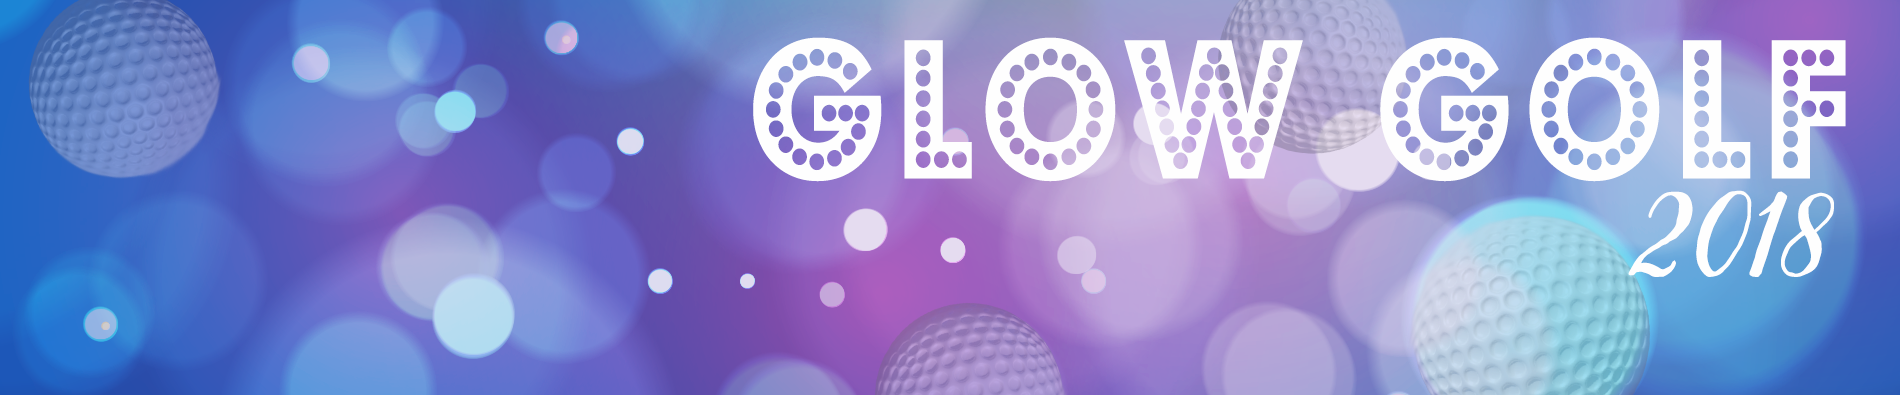 Glow Golf 2018 graphic on blue and purple background with light blurs and golf balls